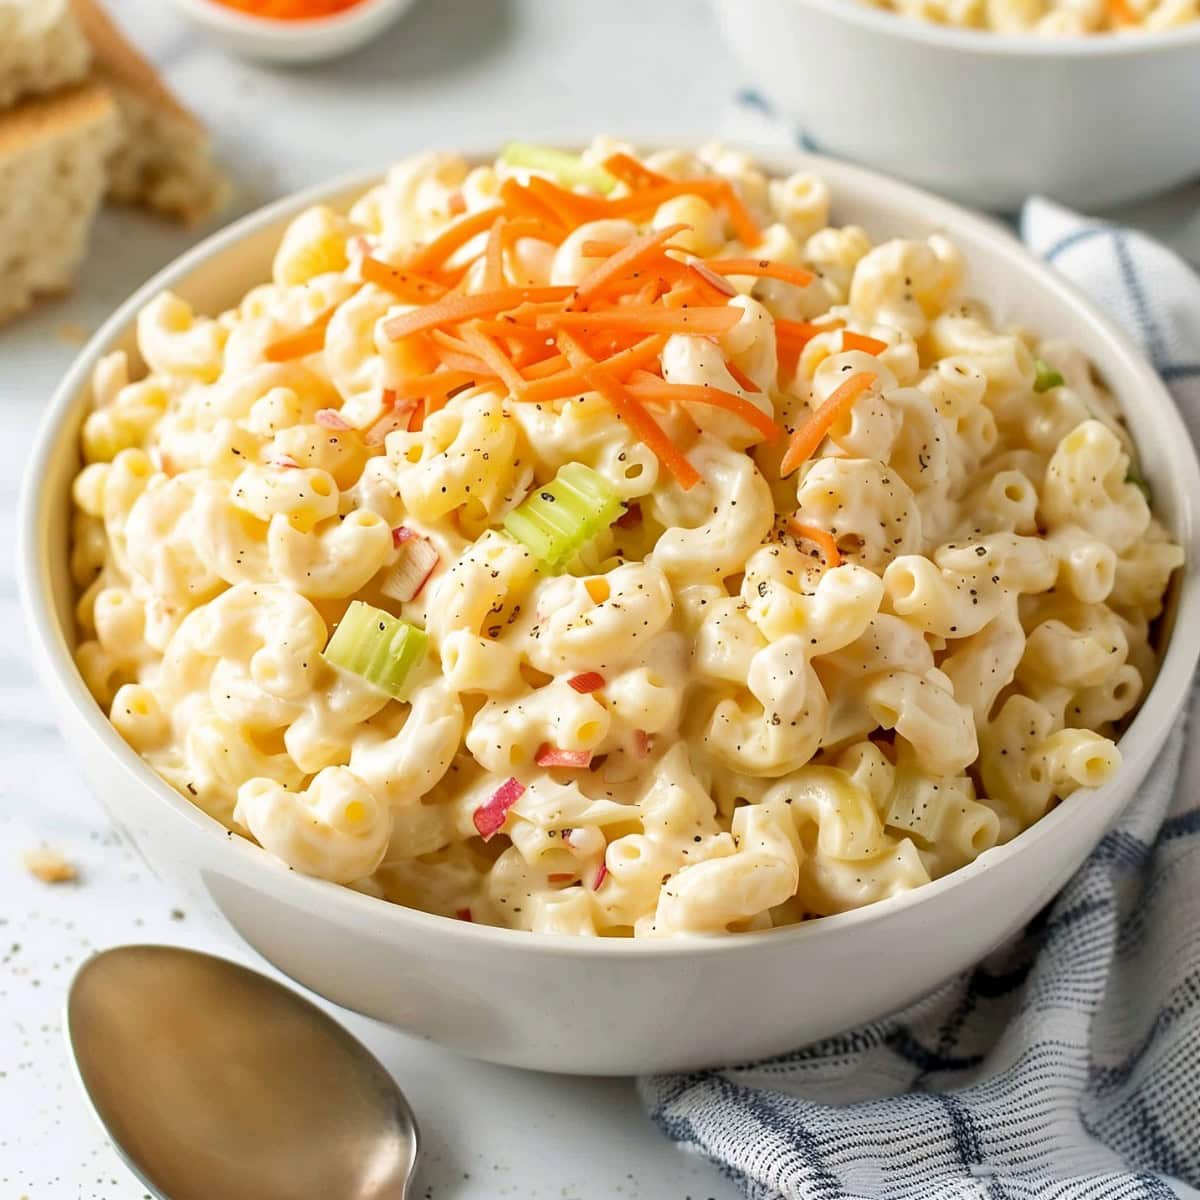 Vibrant Hawaiian macaroni salad, featuring colorful ingredients including carrots, celery and red onions with creamy and tangy dressing